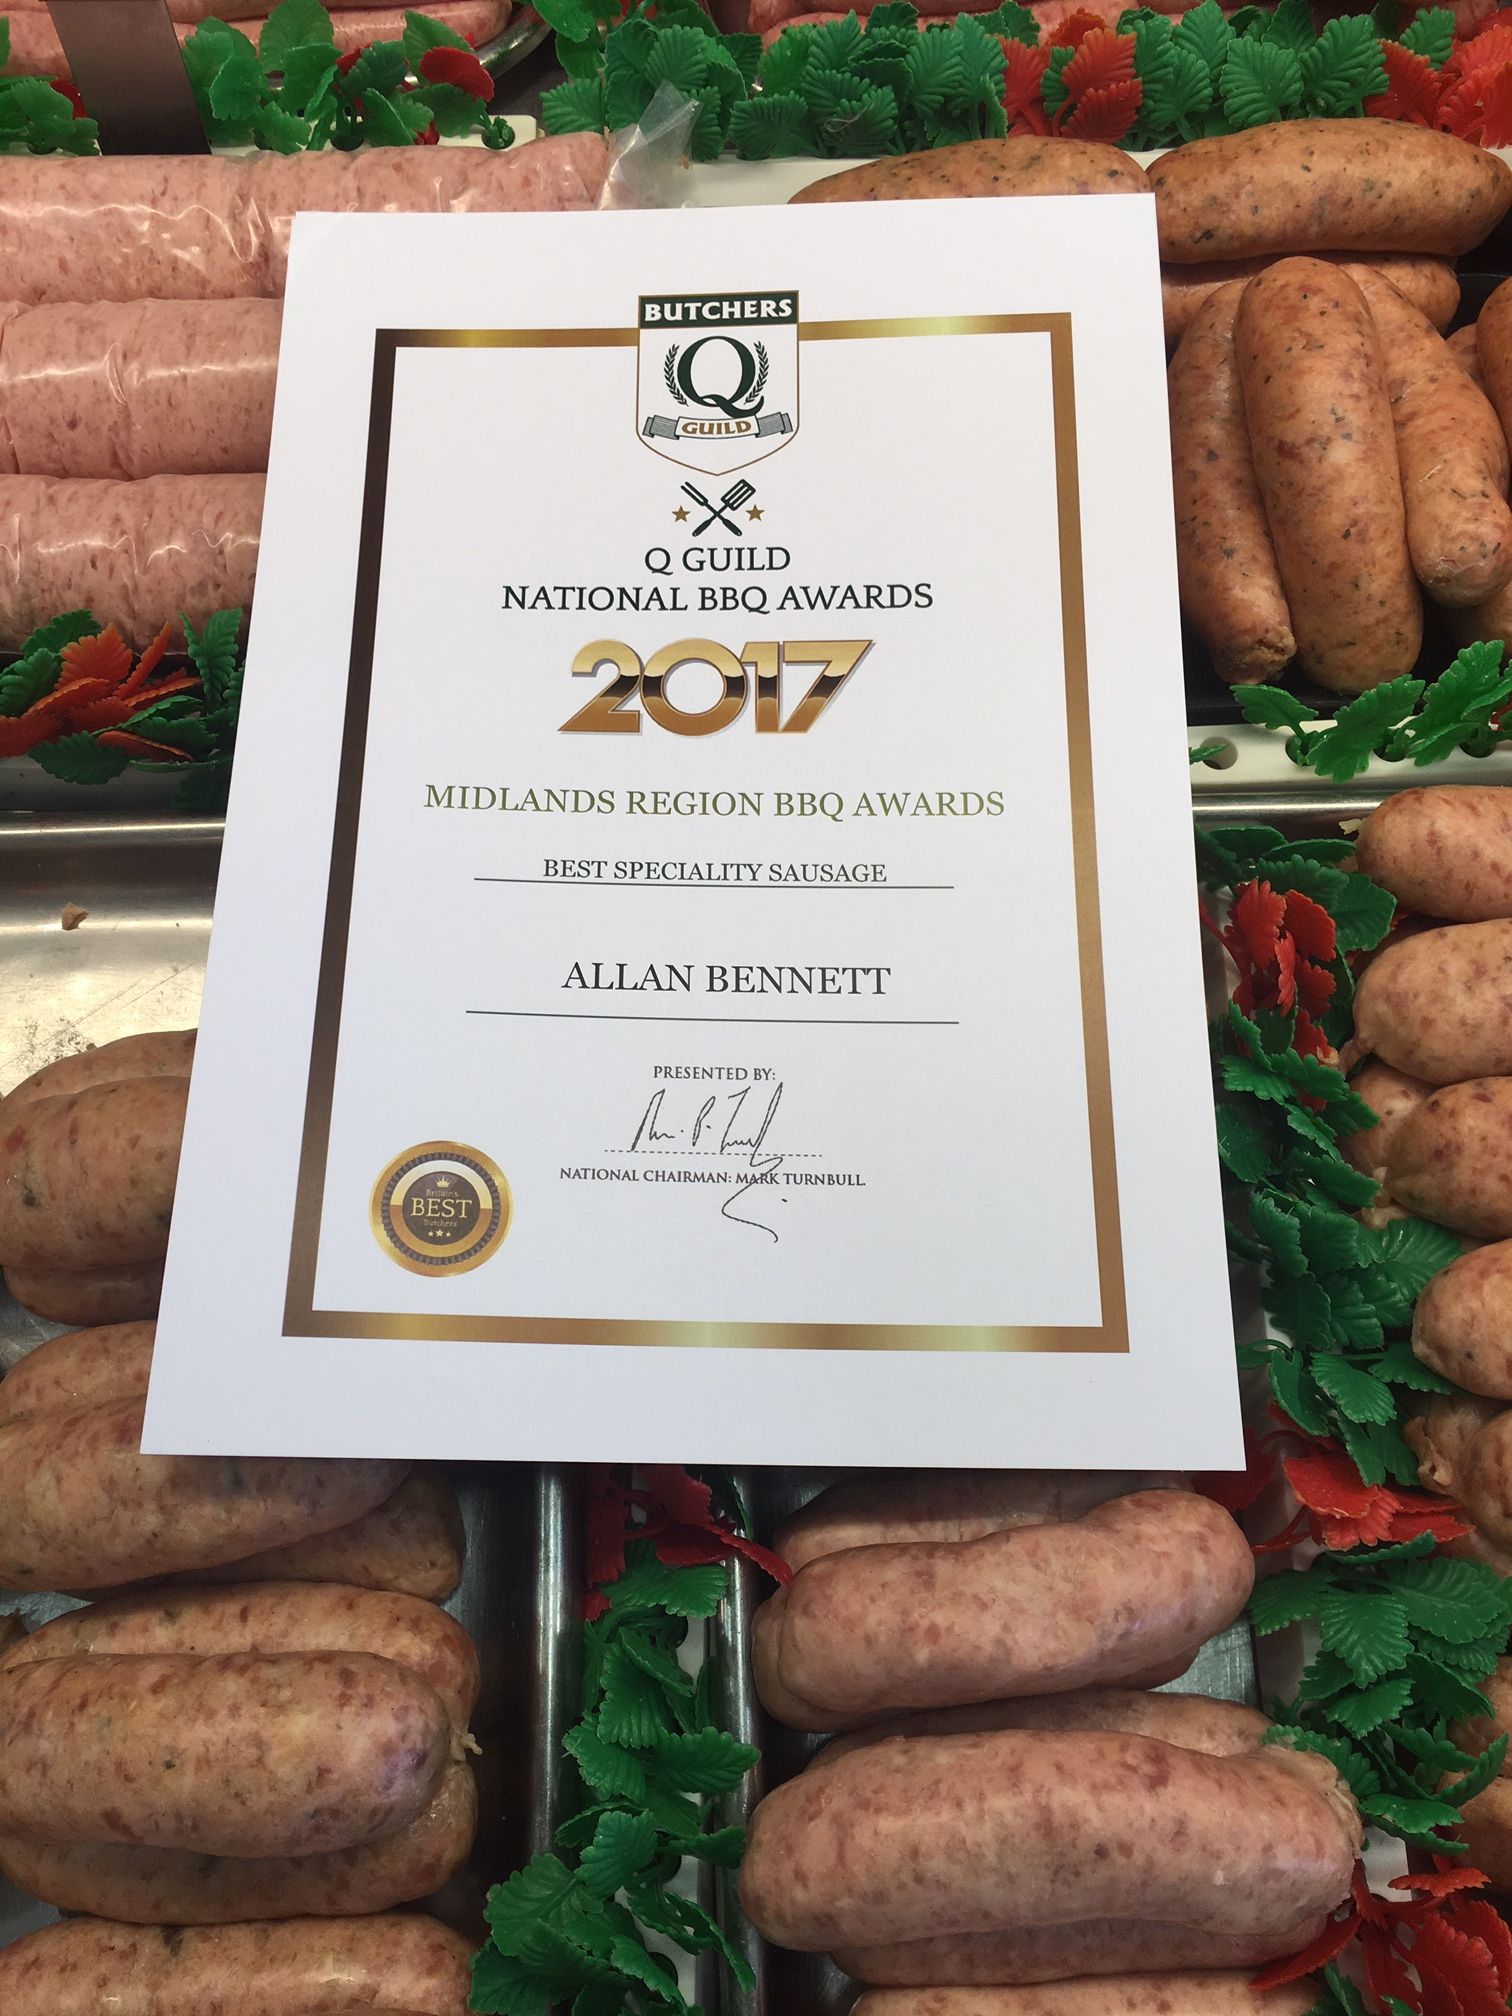 Q Guild National BBQ Awards 2017 - Best Speciality Sausage